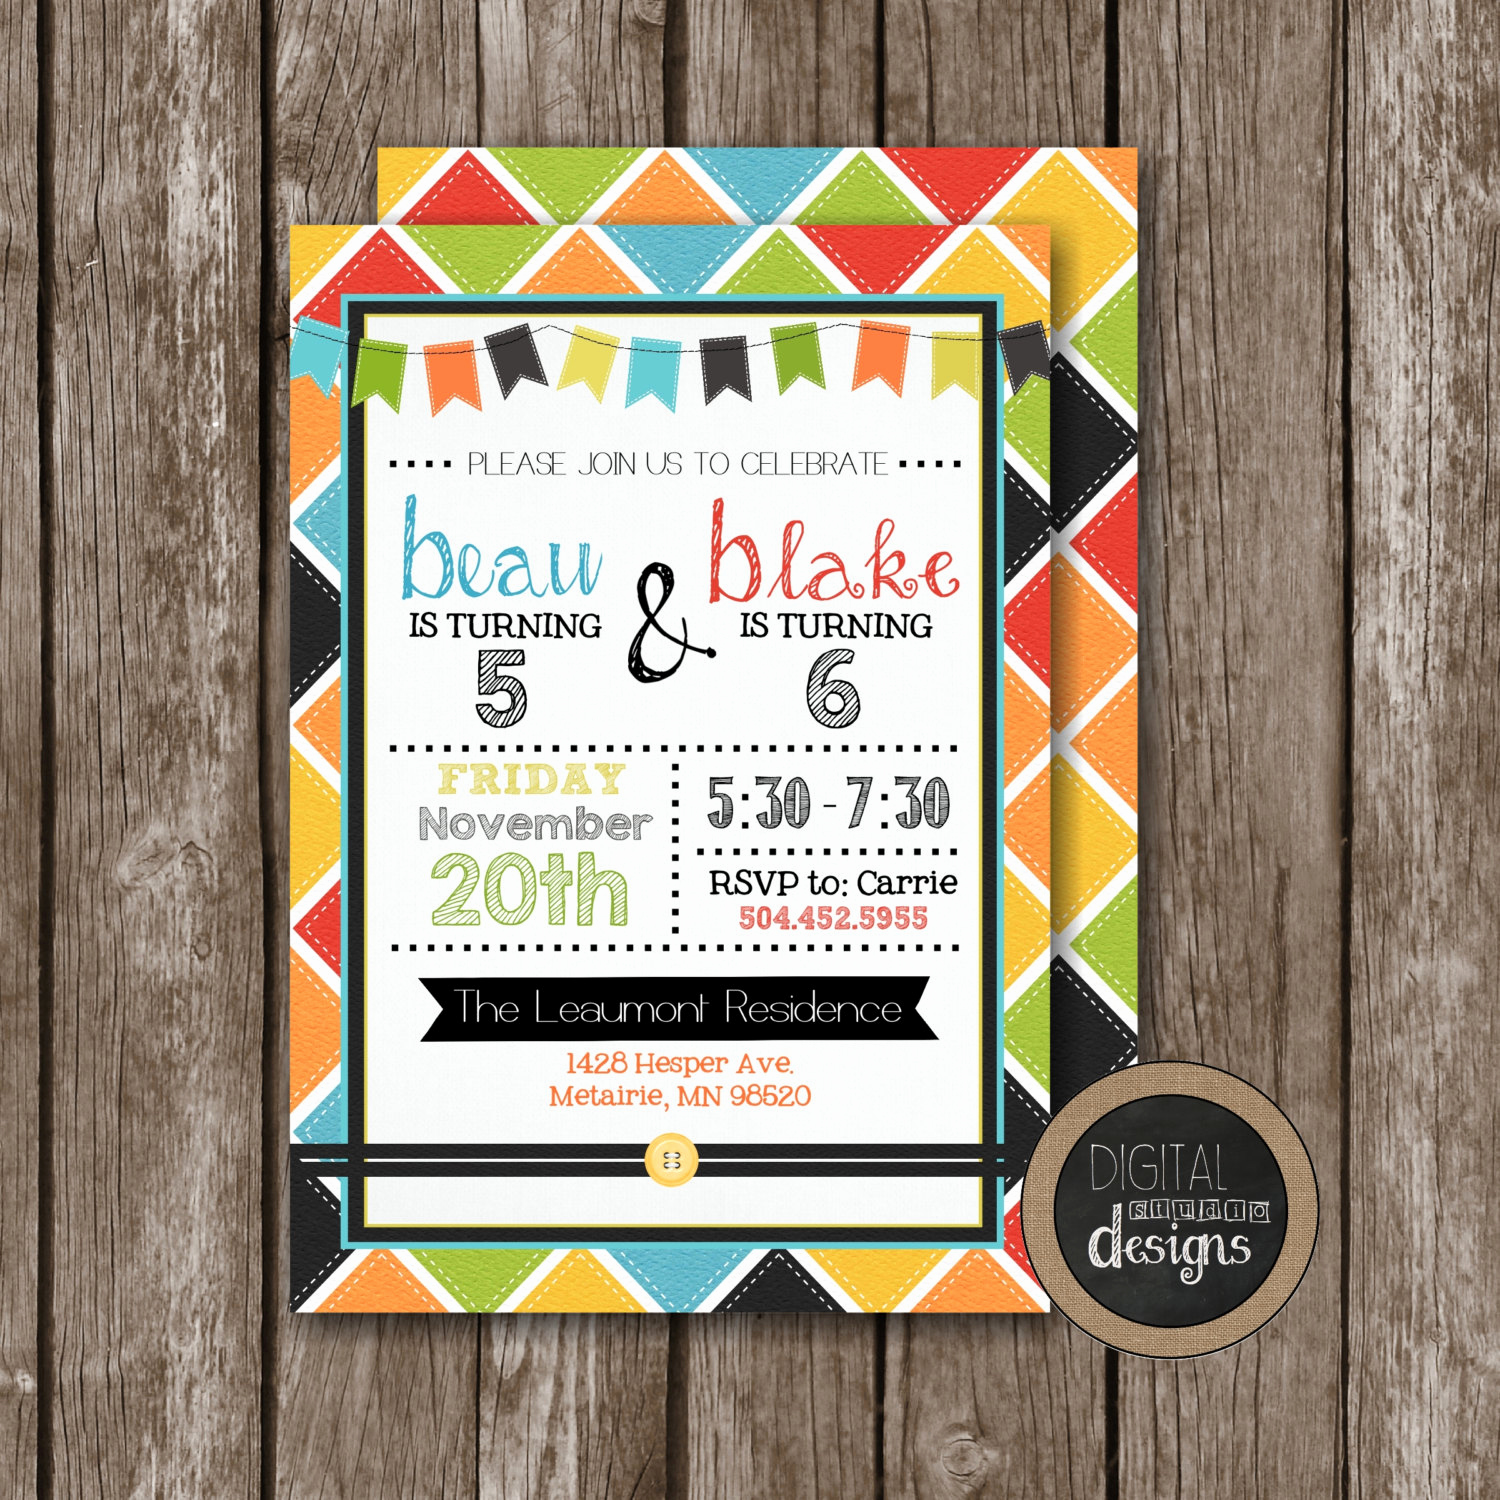 Joint Birthday Party Invitation Wording Inspirational Sibling Birthday Invitation Joint by Digitalstudiodesigns